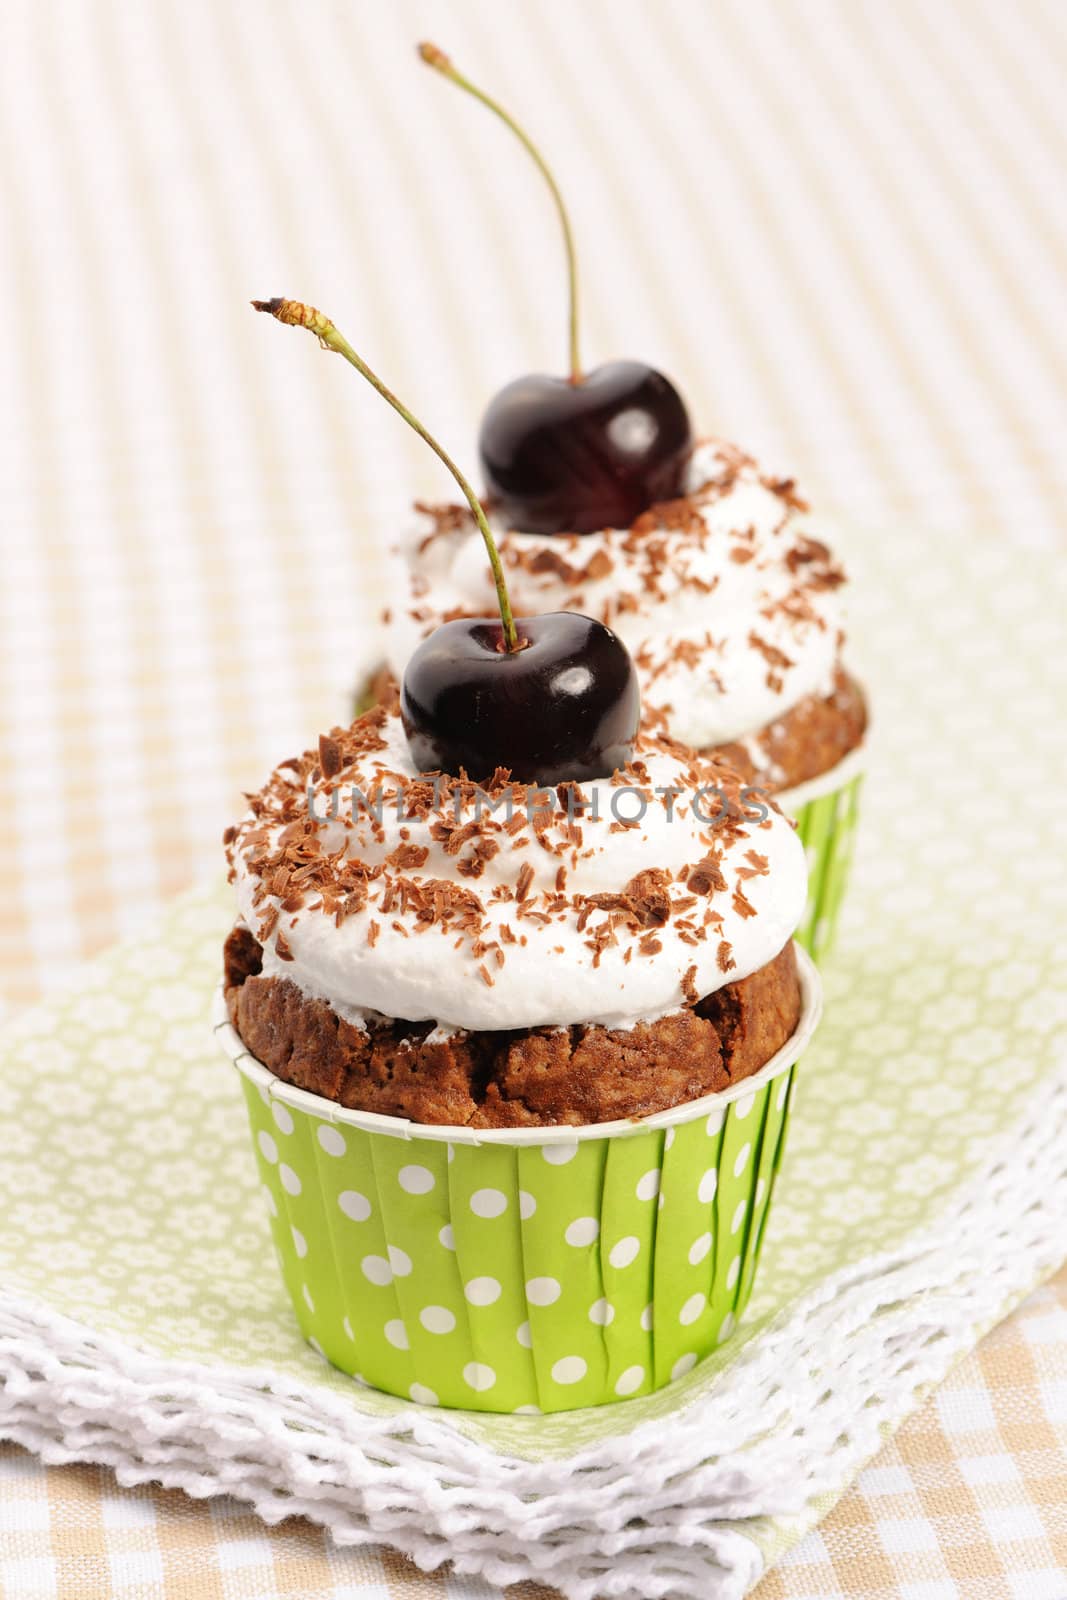 Cupcakes with whipped cream and cherry on a table